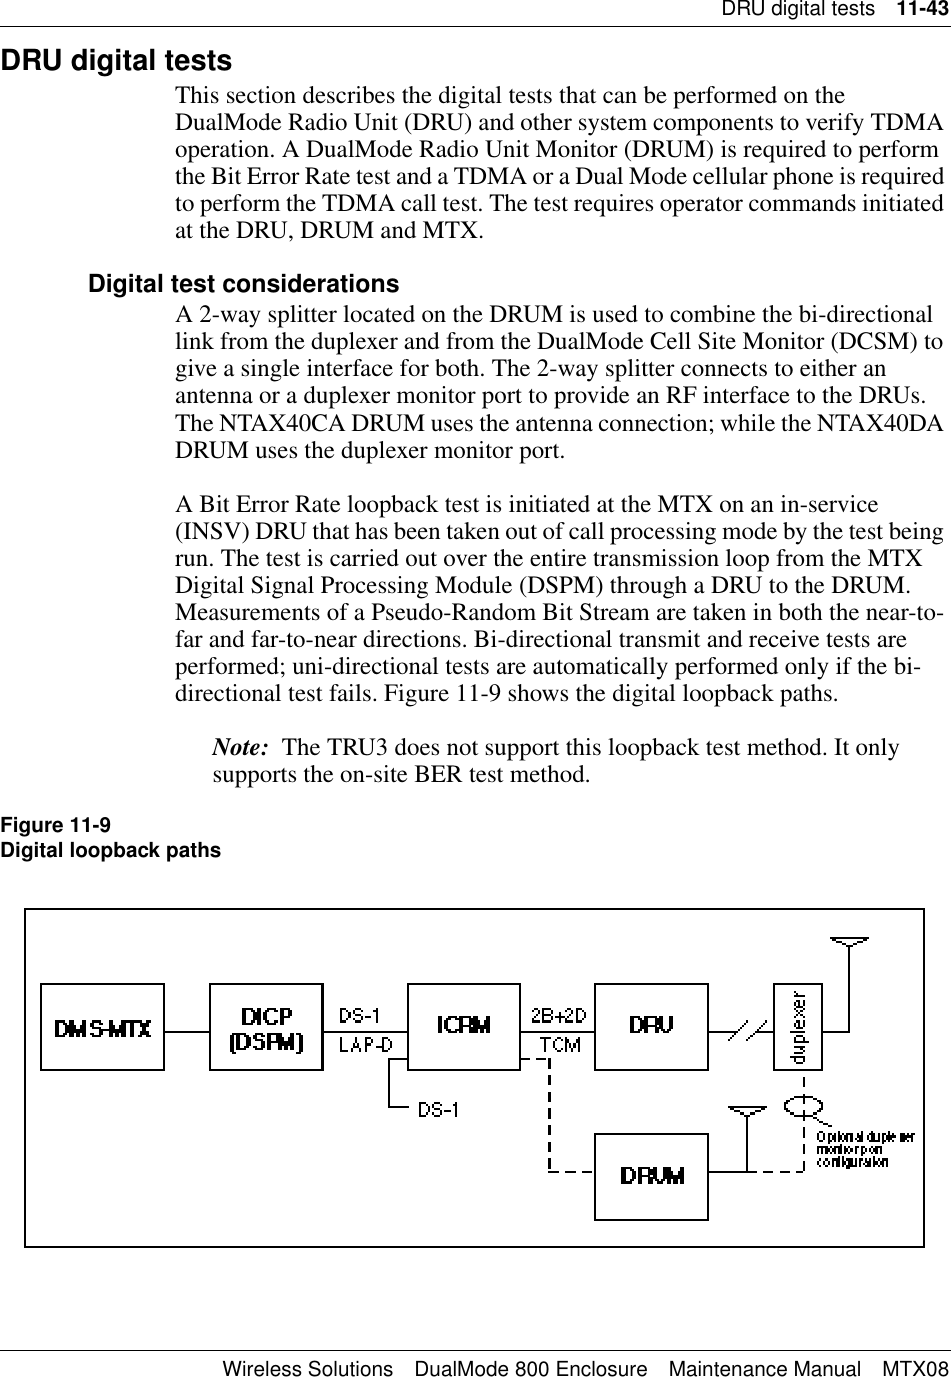 DRU digital tests 11-43Wireless Solutions DualMode 800 Enclosure Maintenance Manual MTX08DRU digital testsThis section describes the digital tests that can be performed on the DualMode Radio Unit (DRU) and other system components to verify TDMA operation. A DualMode Radio Unit Monitor (DRUM) is required to perform the Bit Error Rate test and a TDMA or a Dual Mode cellular phone is required to perform the TDMA call test. The test requires operator commands initiated at the DRU, DRUM and MTX.Digital test considerationsA 2-way splitter located on the DRUM is used to combine the bi-directional link from the duplexer and from the DualMode Cell Site Monitor (DCSM) to give a single interface for both. The 2-way splitter connects to either an antenna or a duplexer monitor port to provide an RF interface to the DRUs. The NTAX40CA DRUM uses the antenna connection; while the NTAX40DA DRUM uses the duplexer monitor port.A Bit Error Rate loopback test is initiated at the MTX on an in-service (INSV) DRU that has been taken out of call processing mode by the test being run. The test is carried out over the entire transmission loop from the MTX Digital Signal Processing Module (DSPM) through a DRU to the DRUM. Measurements of a Pseudo-Random Bit Stream are taken in both the near-to-far and far-to-near directions. Bi-directional transmit and receive tests are performed; uni-directional tests are automatically performed only if the bi-directional test fails. Figure 11-9 shows the digital loopback paths.Note:  The TRU3 does not support this loopback test method. It only supports the on-site BER test method.Figure 11-9Digital loopback paths